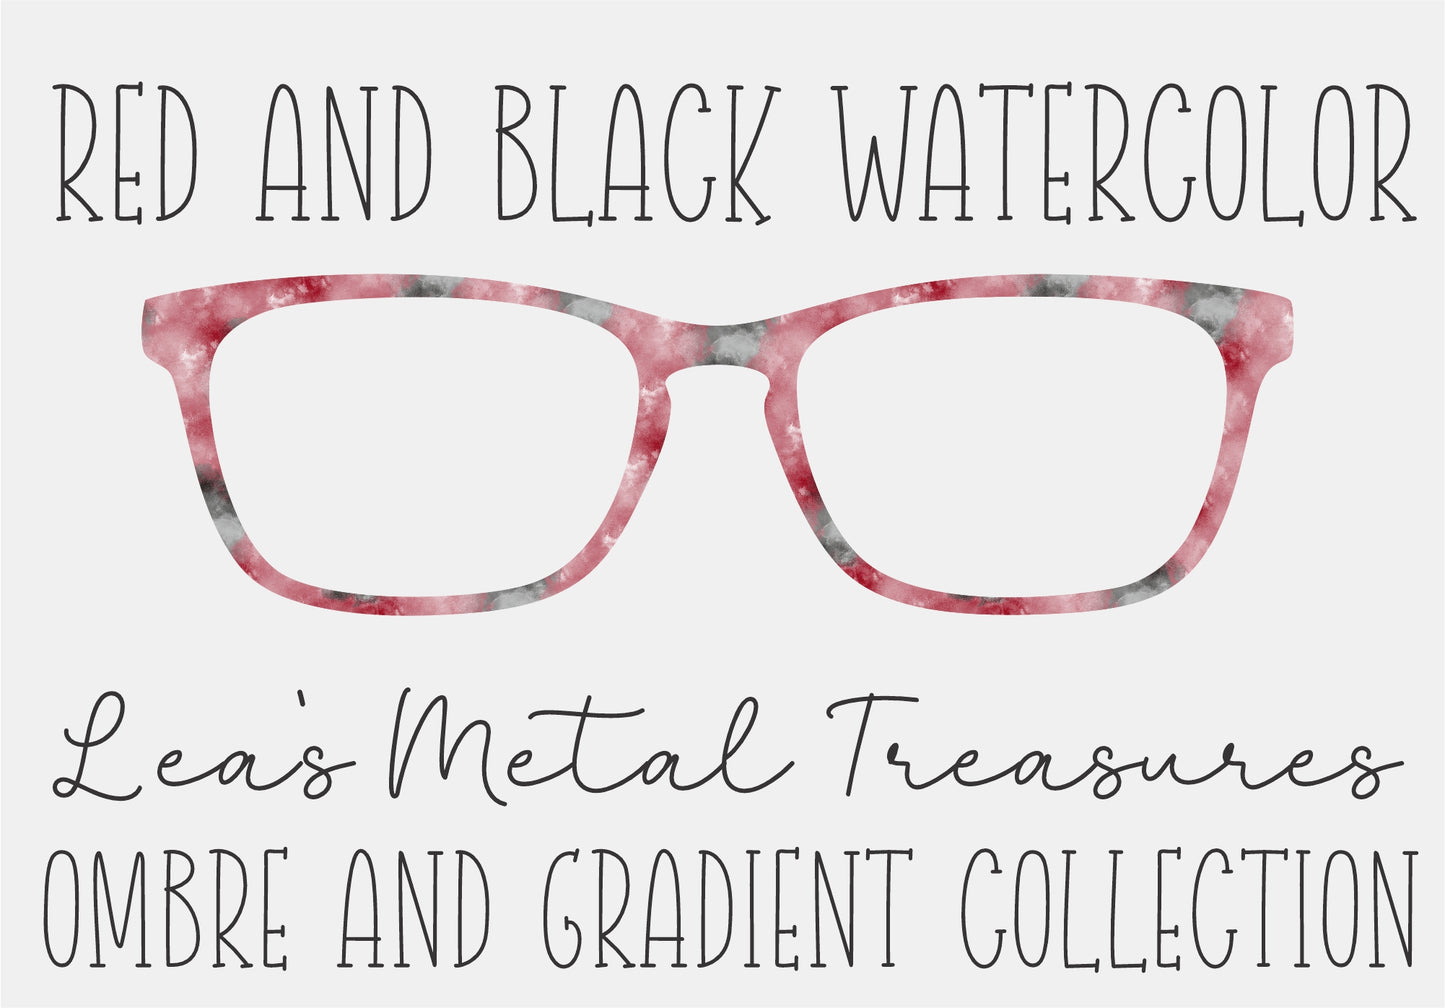 RED AND BLACK WATERCOLOR Eyewear Frame Toppers COMES WITH MAGNETS